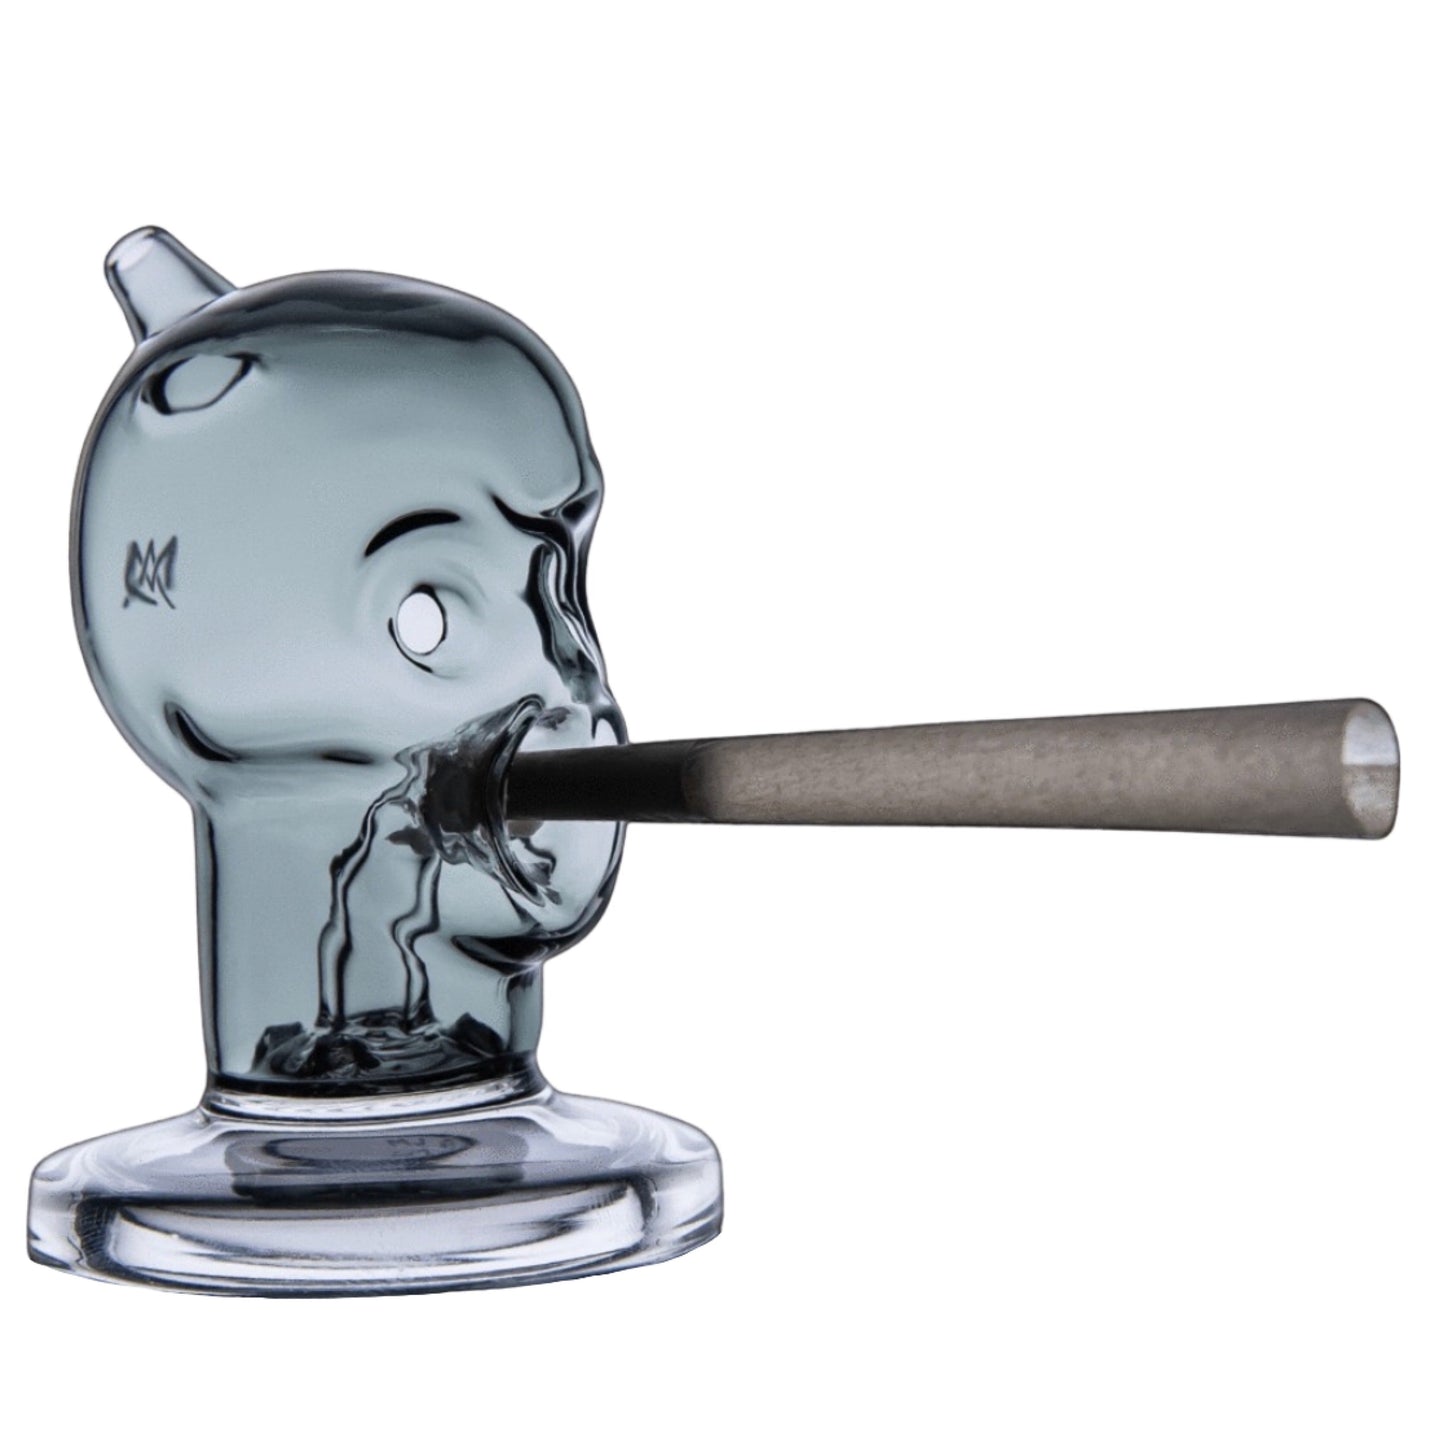 MJ Arsenal Limited Edition Rip'r Blunt Bubbler